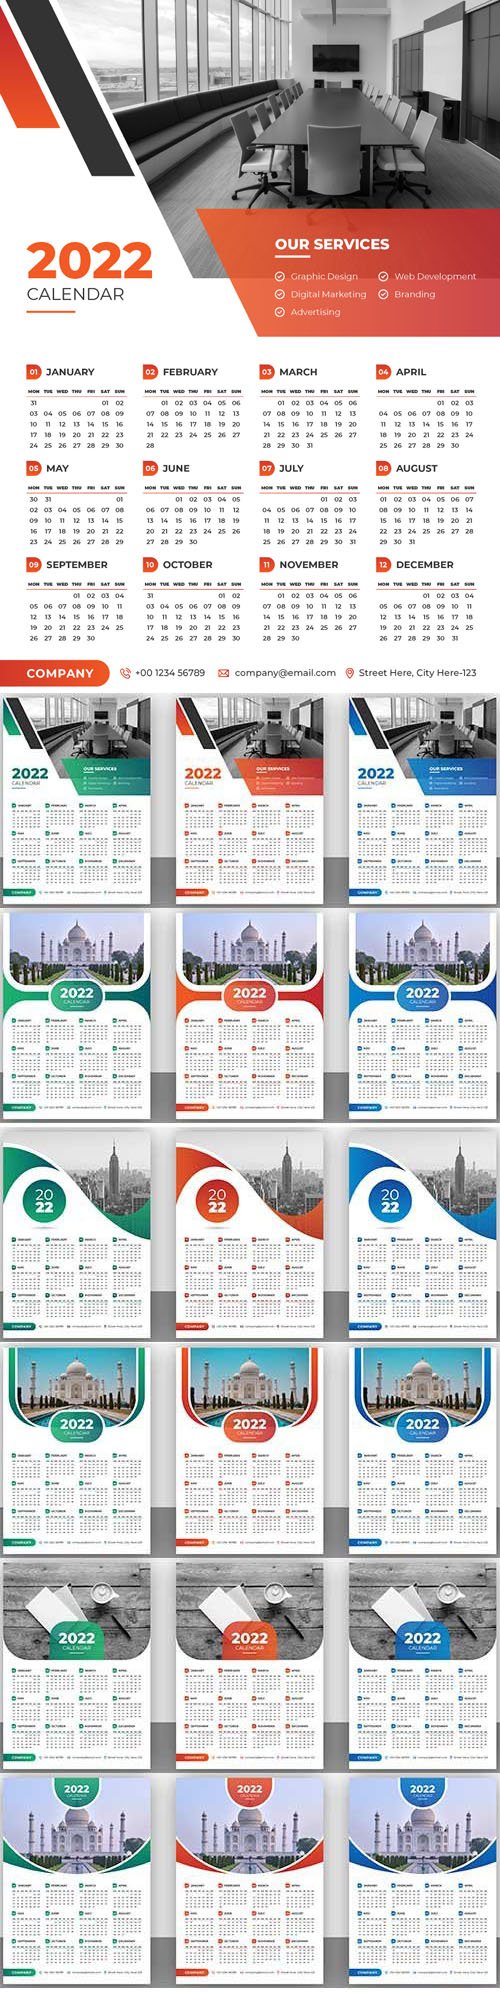 Realistic 2022 Calendars - 6 Vector Templates In 3 Colors Each